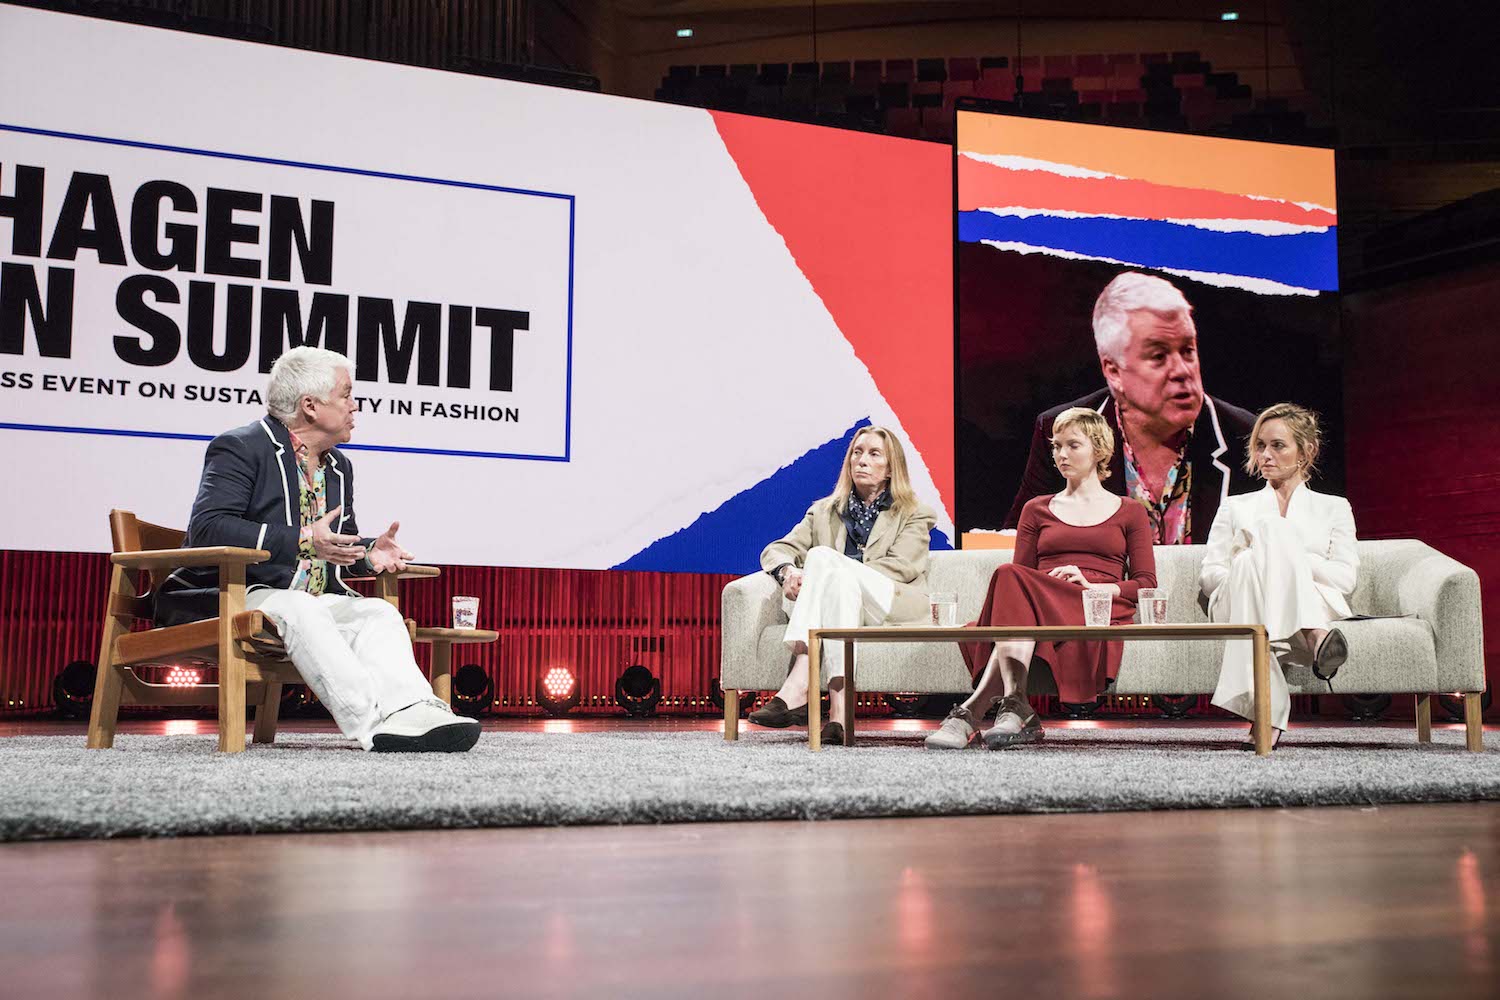 Tim Blanks in a panel discussion at the Copenhagen Fashion Summit with Tonne Goodman, Lily Cole and Amber Valletta on how brands and media houses should go about communicating sustainability